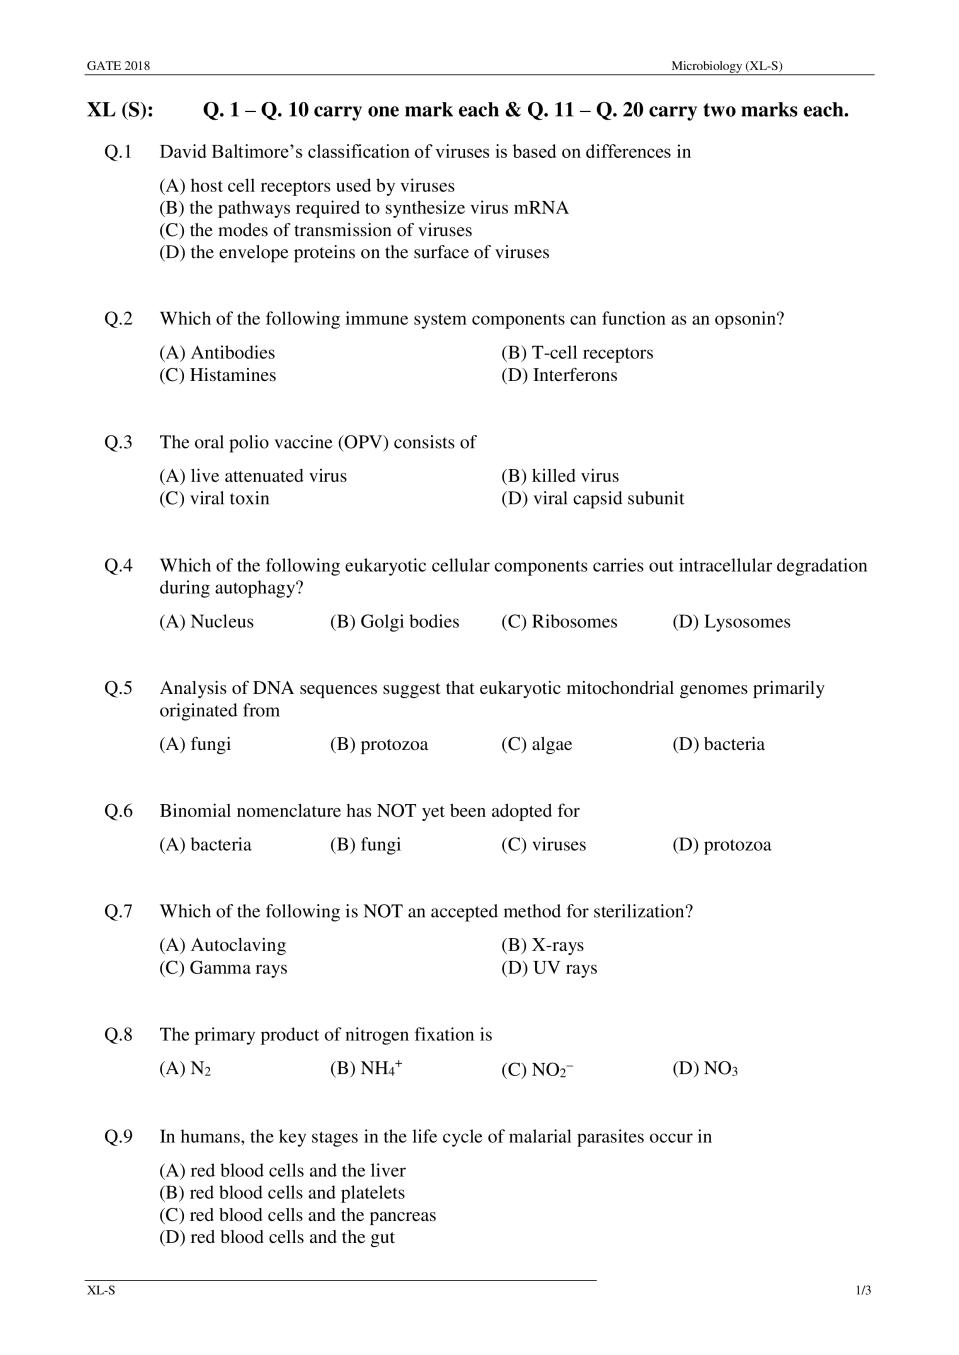 GATE 2018 Microbiology (XL-S) Question Paper with Answer - Page 1